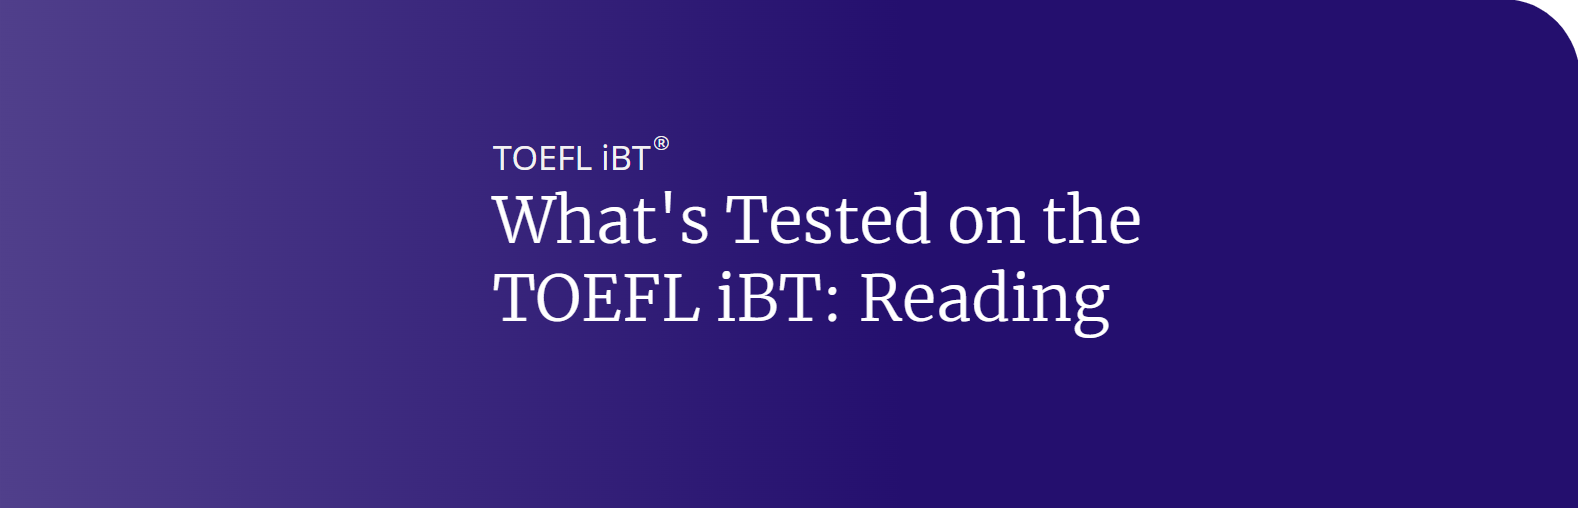 What's Tested on the TOEFL iBT Reading